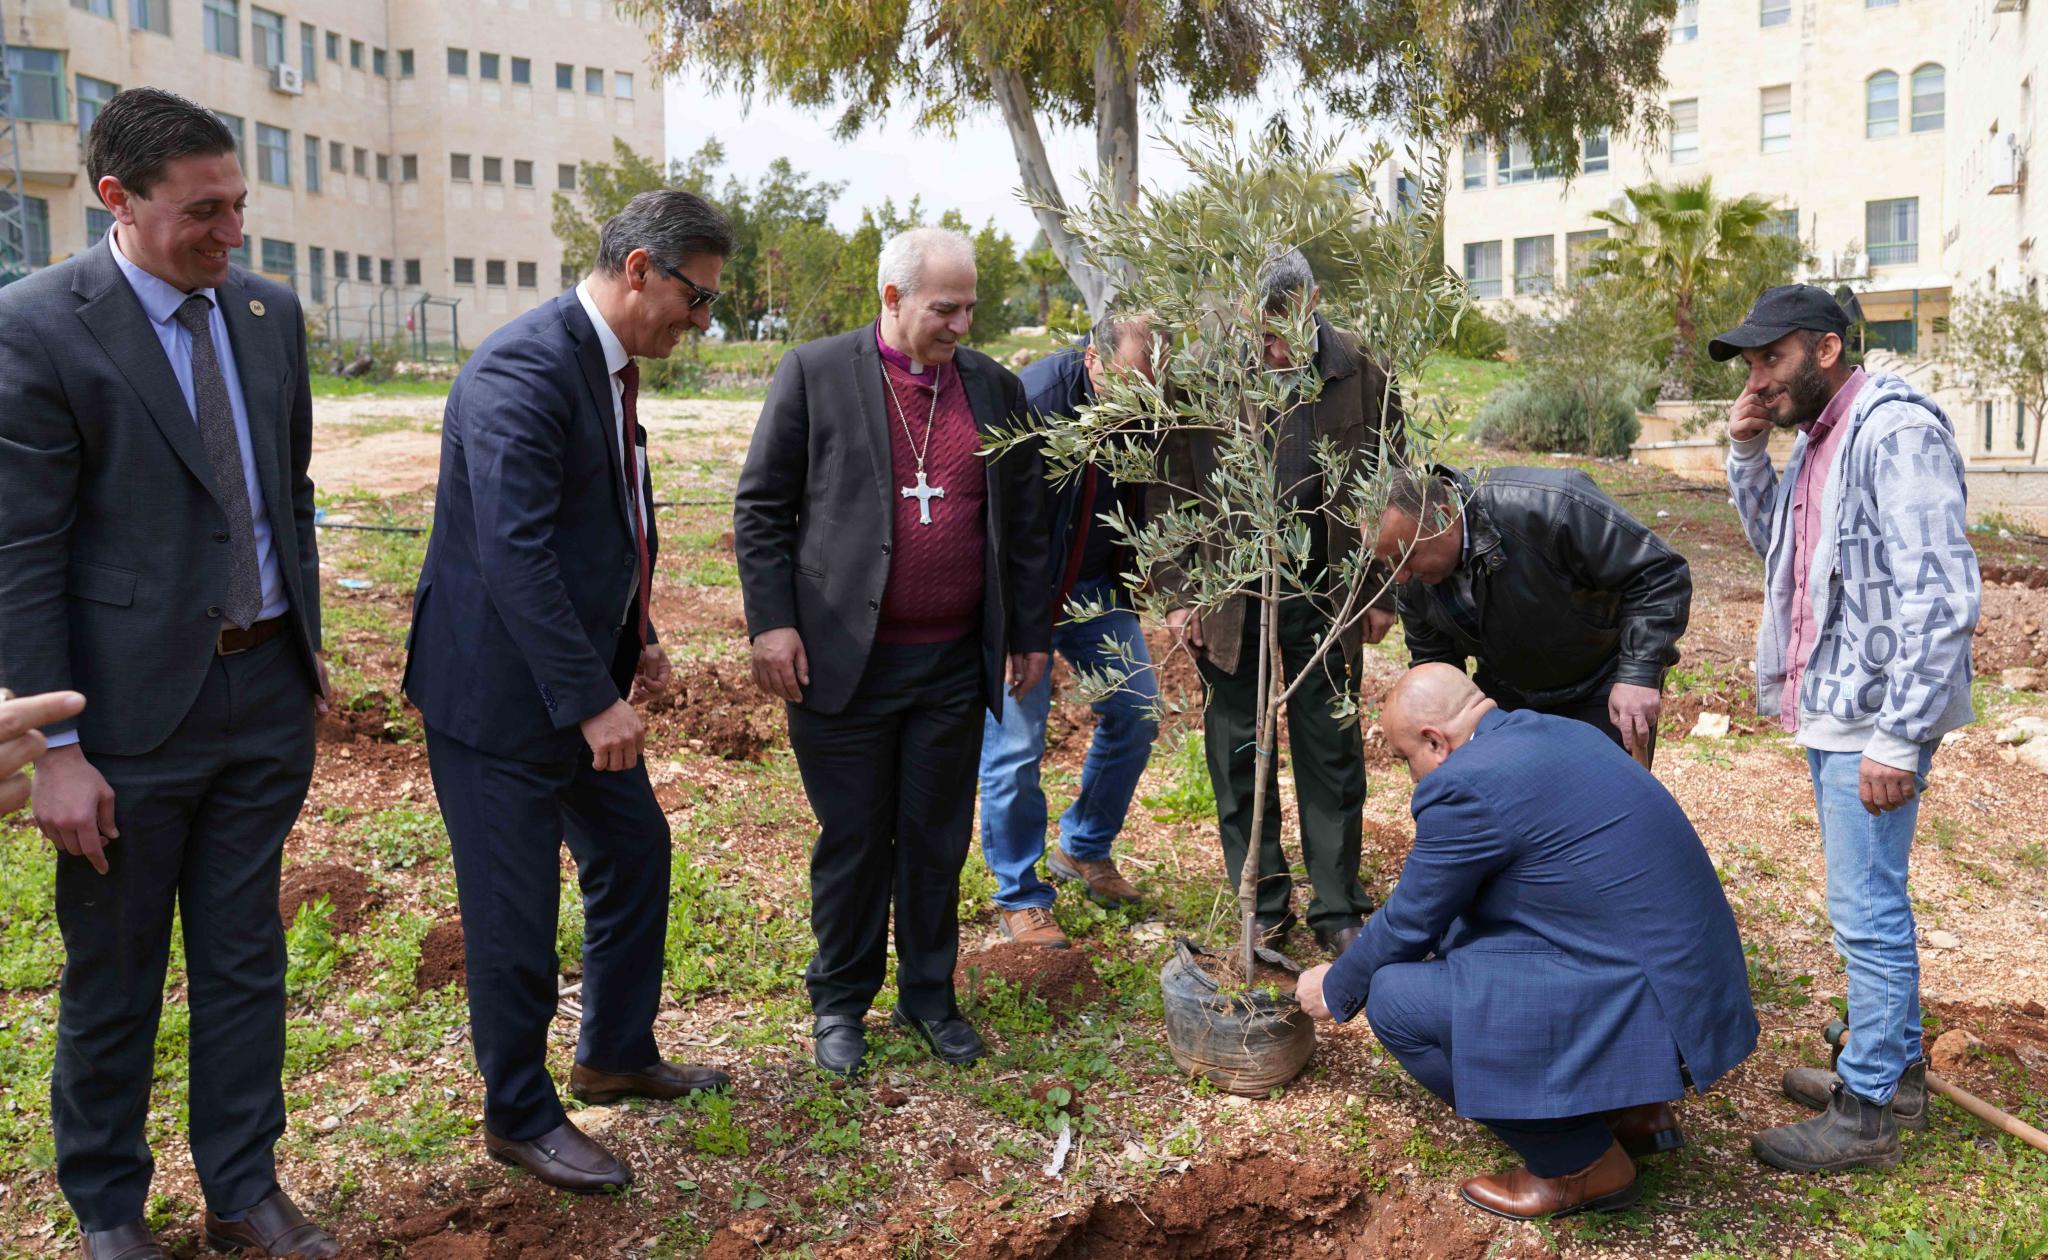 AAUP and the Evangelical Lutheran Church in Jordan and the Holy Lands Organizes a Campaign about "A Tree for Life" in the Memory of COVID-19 Victims